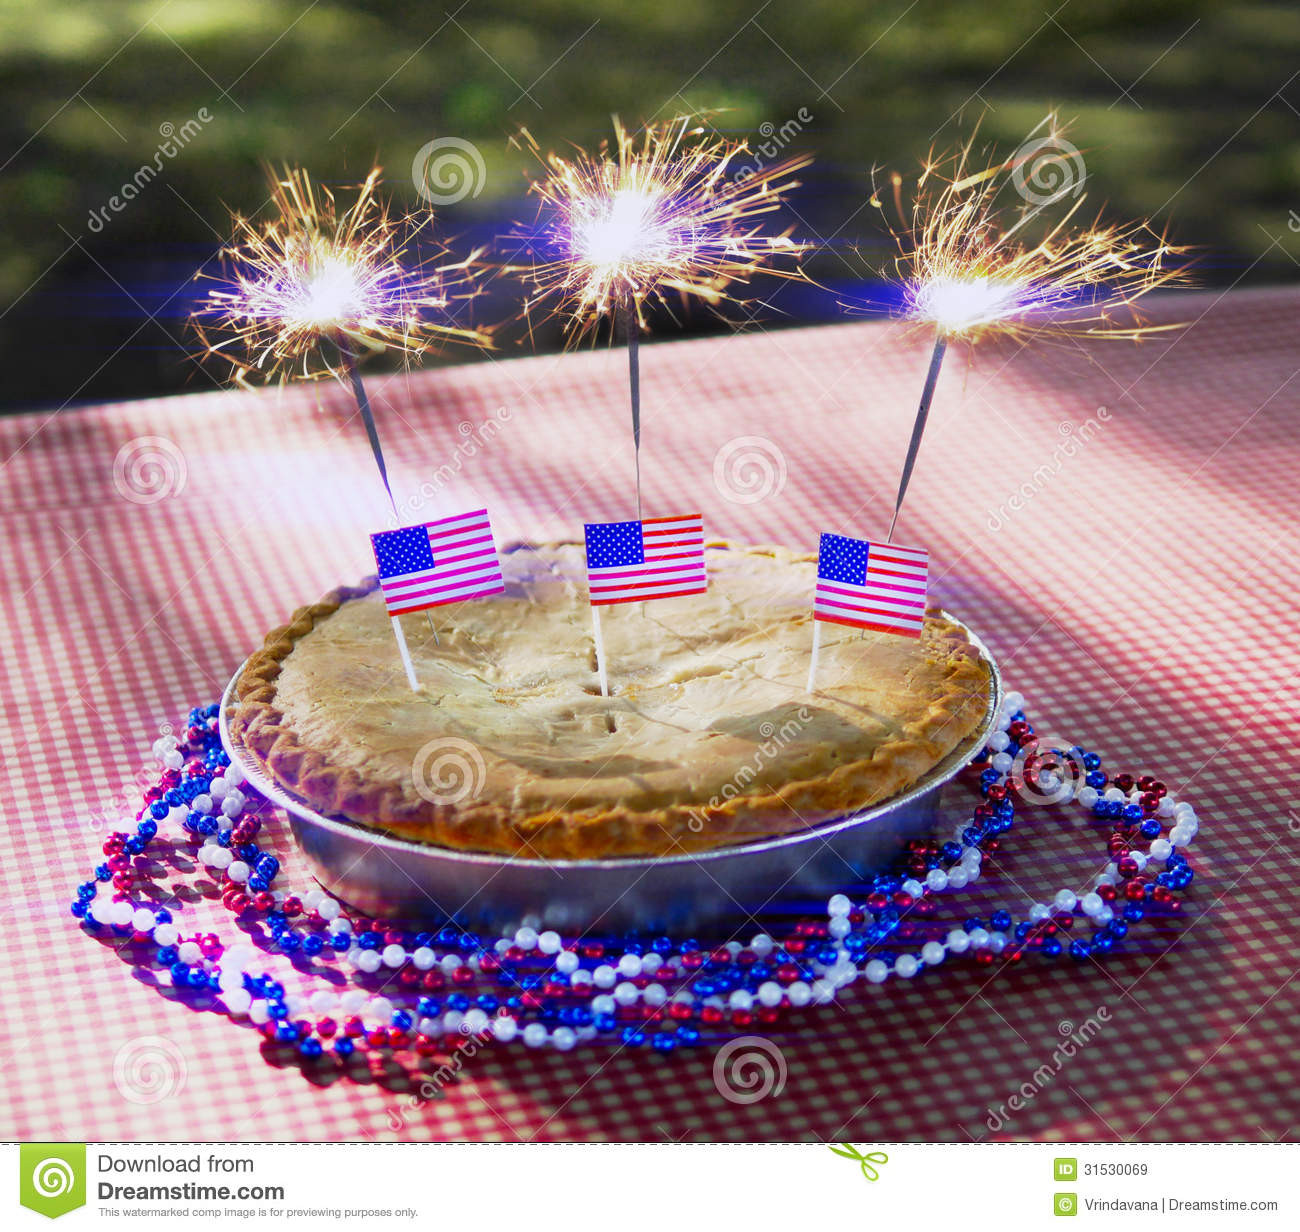 Apple Pie 4Th Of July
 4th July Apple Pie With Sparklers A Table Stock